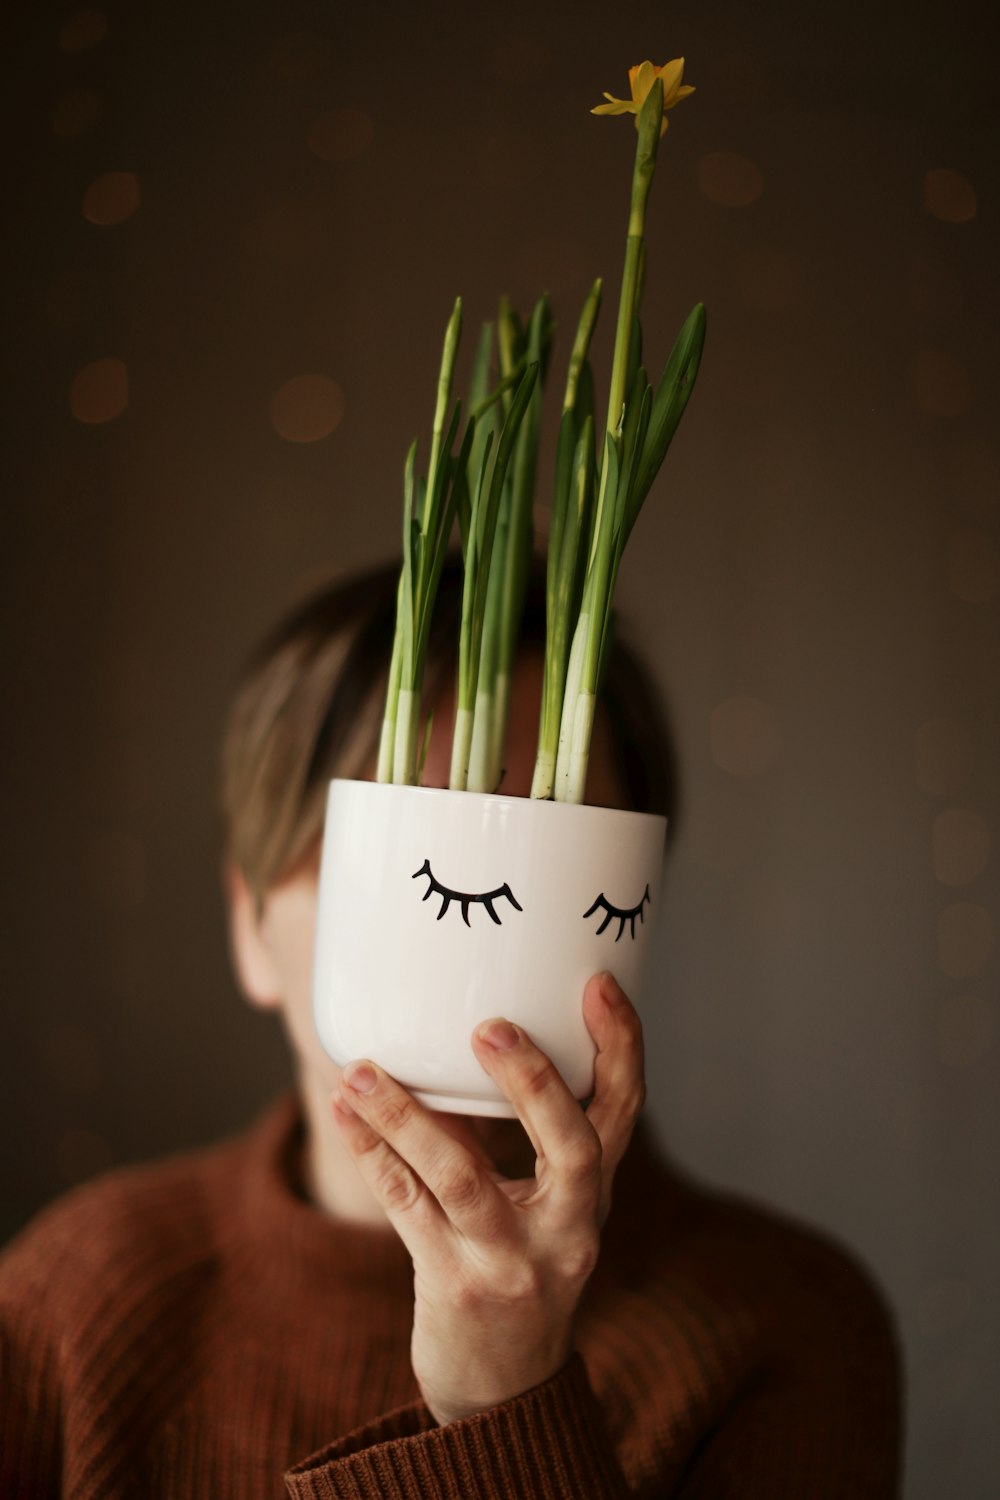 a woman holding a plant with eyelashes on it